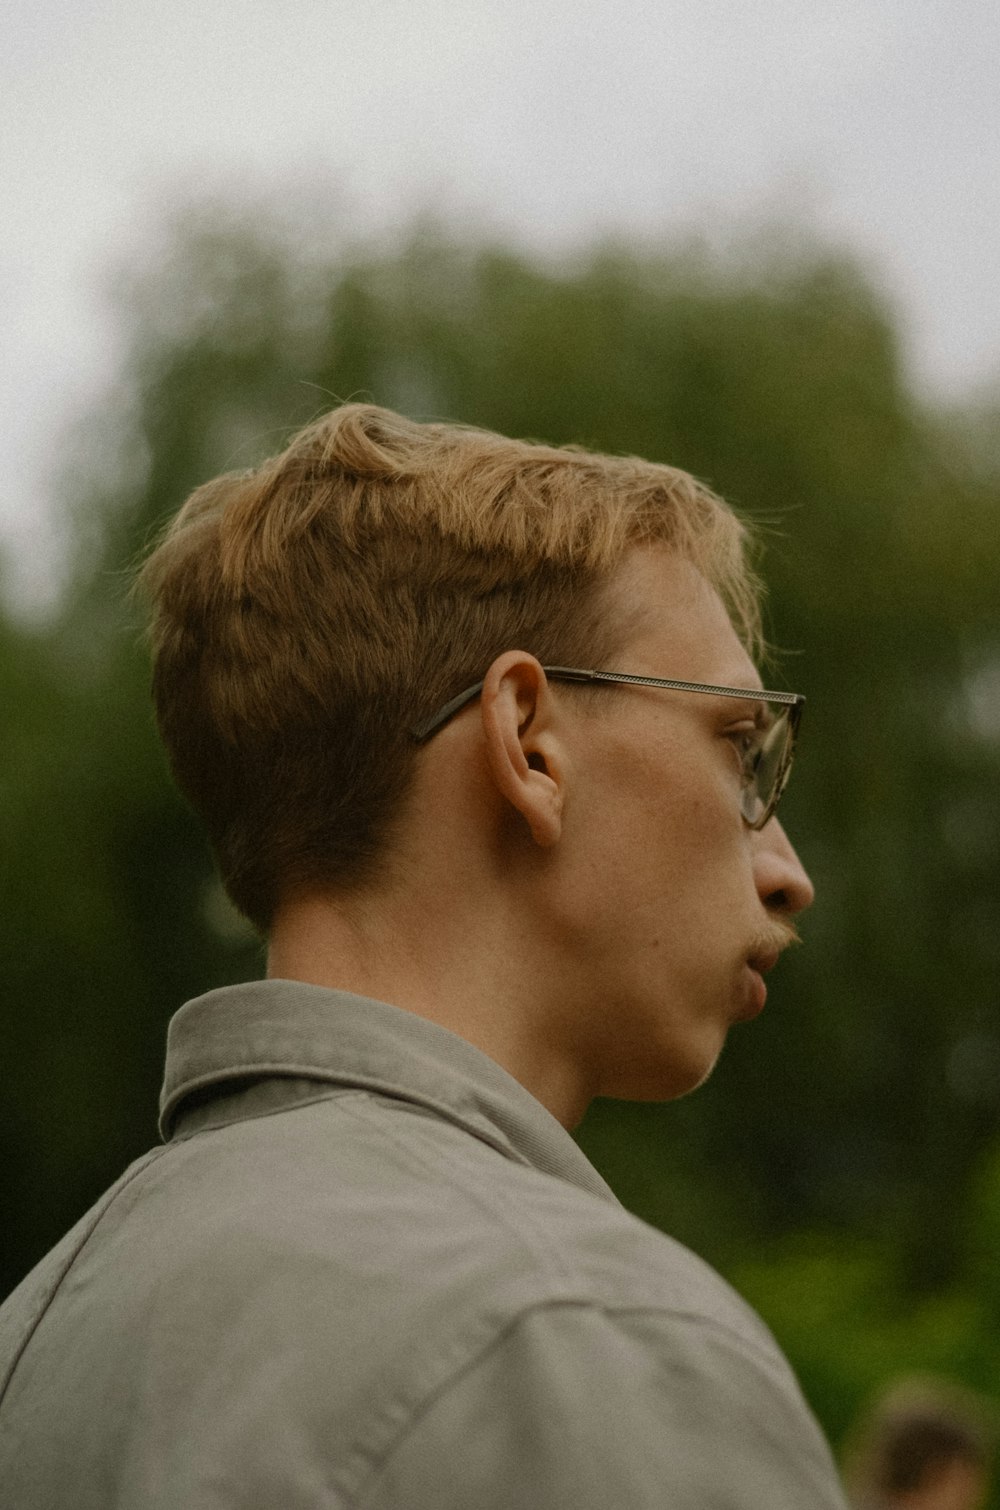 a man with glasses is looking away from the camera